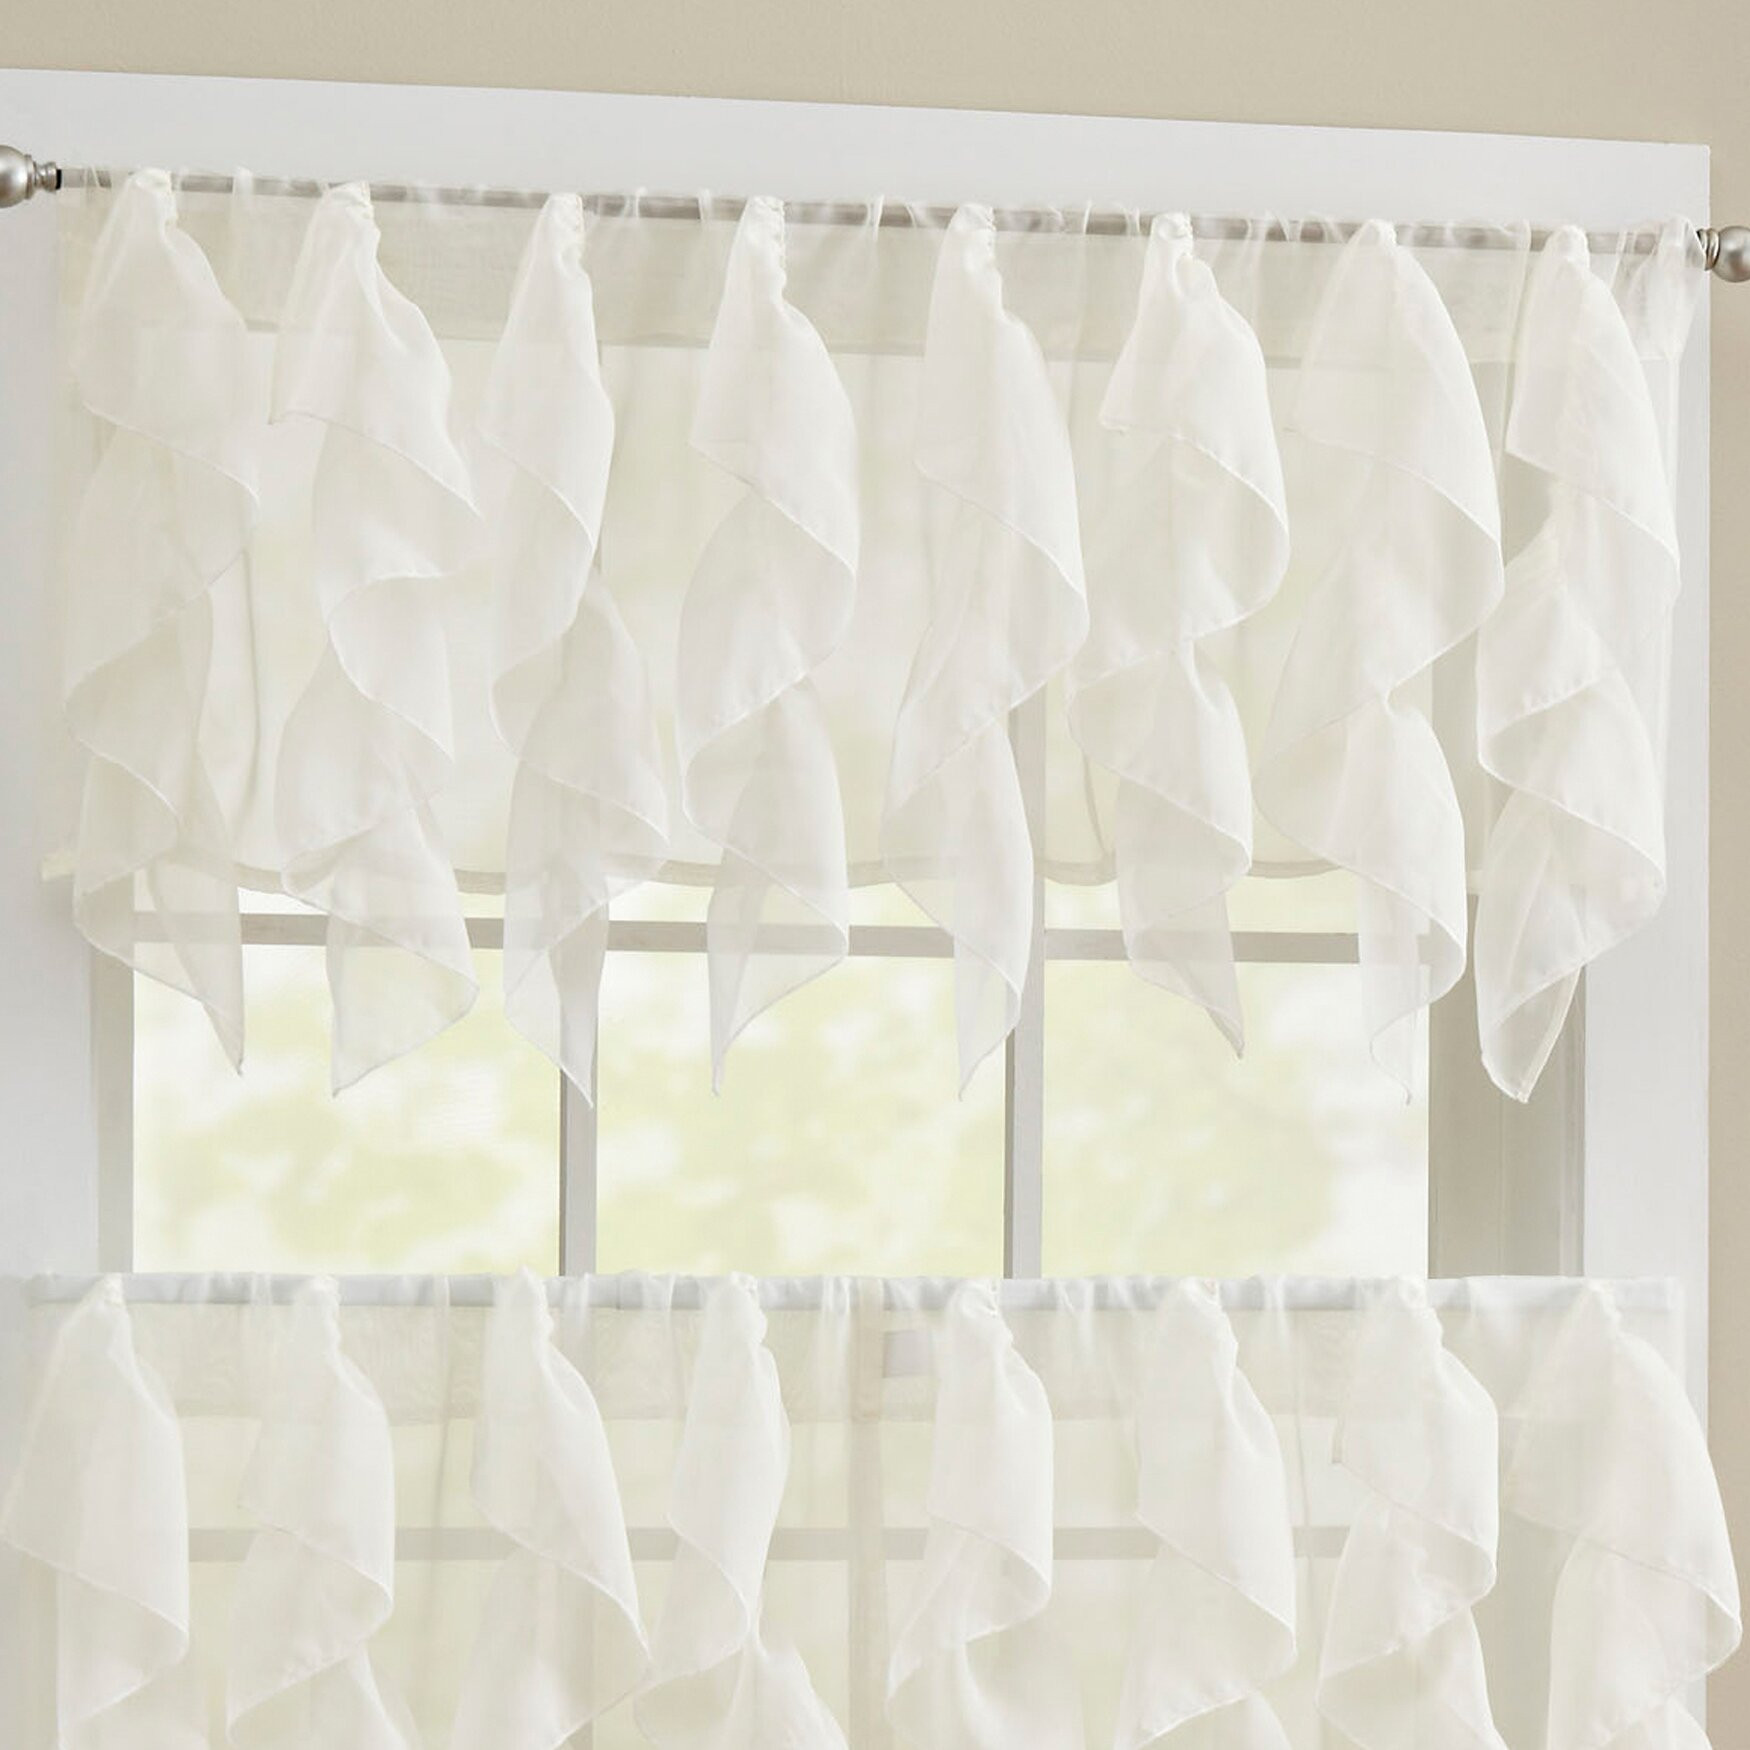 Ruffled Kitchen Curtains
 Sweet Home Collection Elegant Sheer Voile Vertical Ruffle